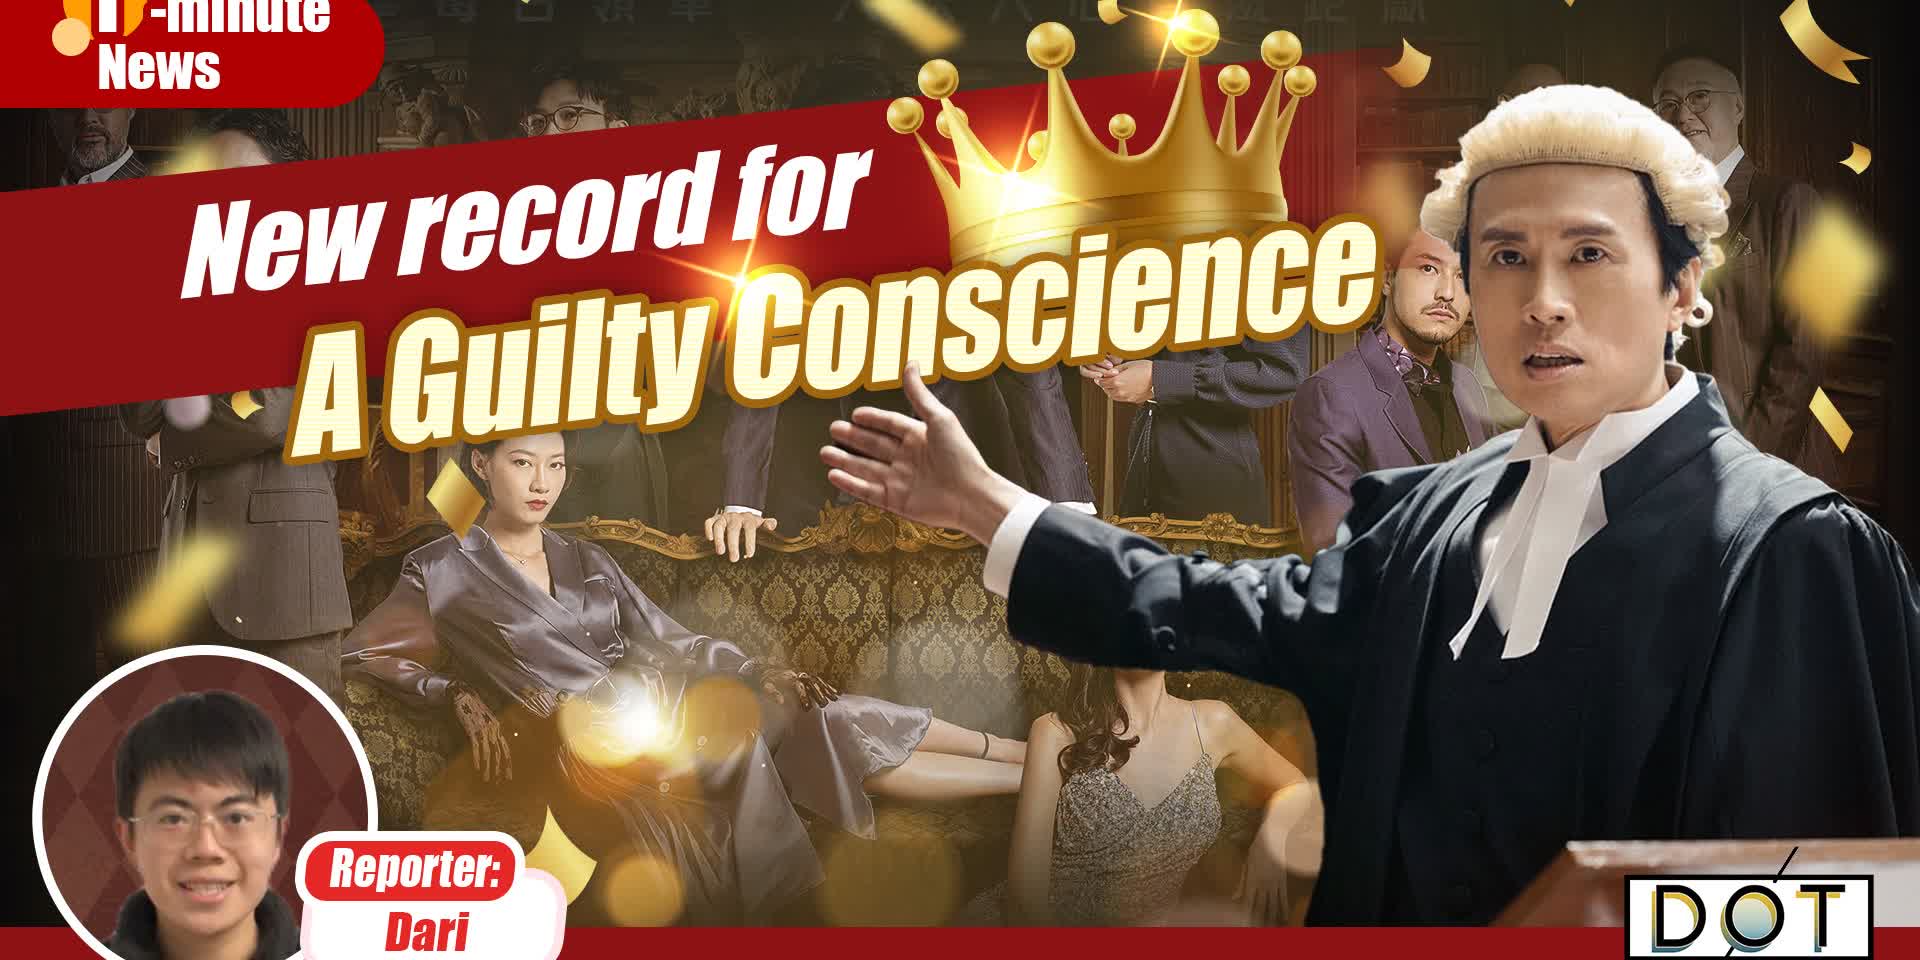 1-minute News | New record for A Guilty Conscience